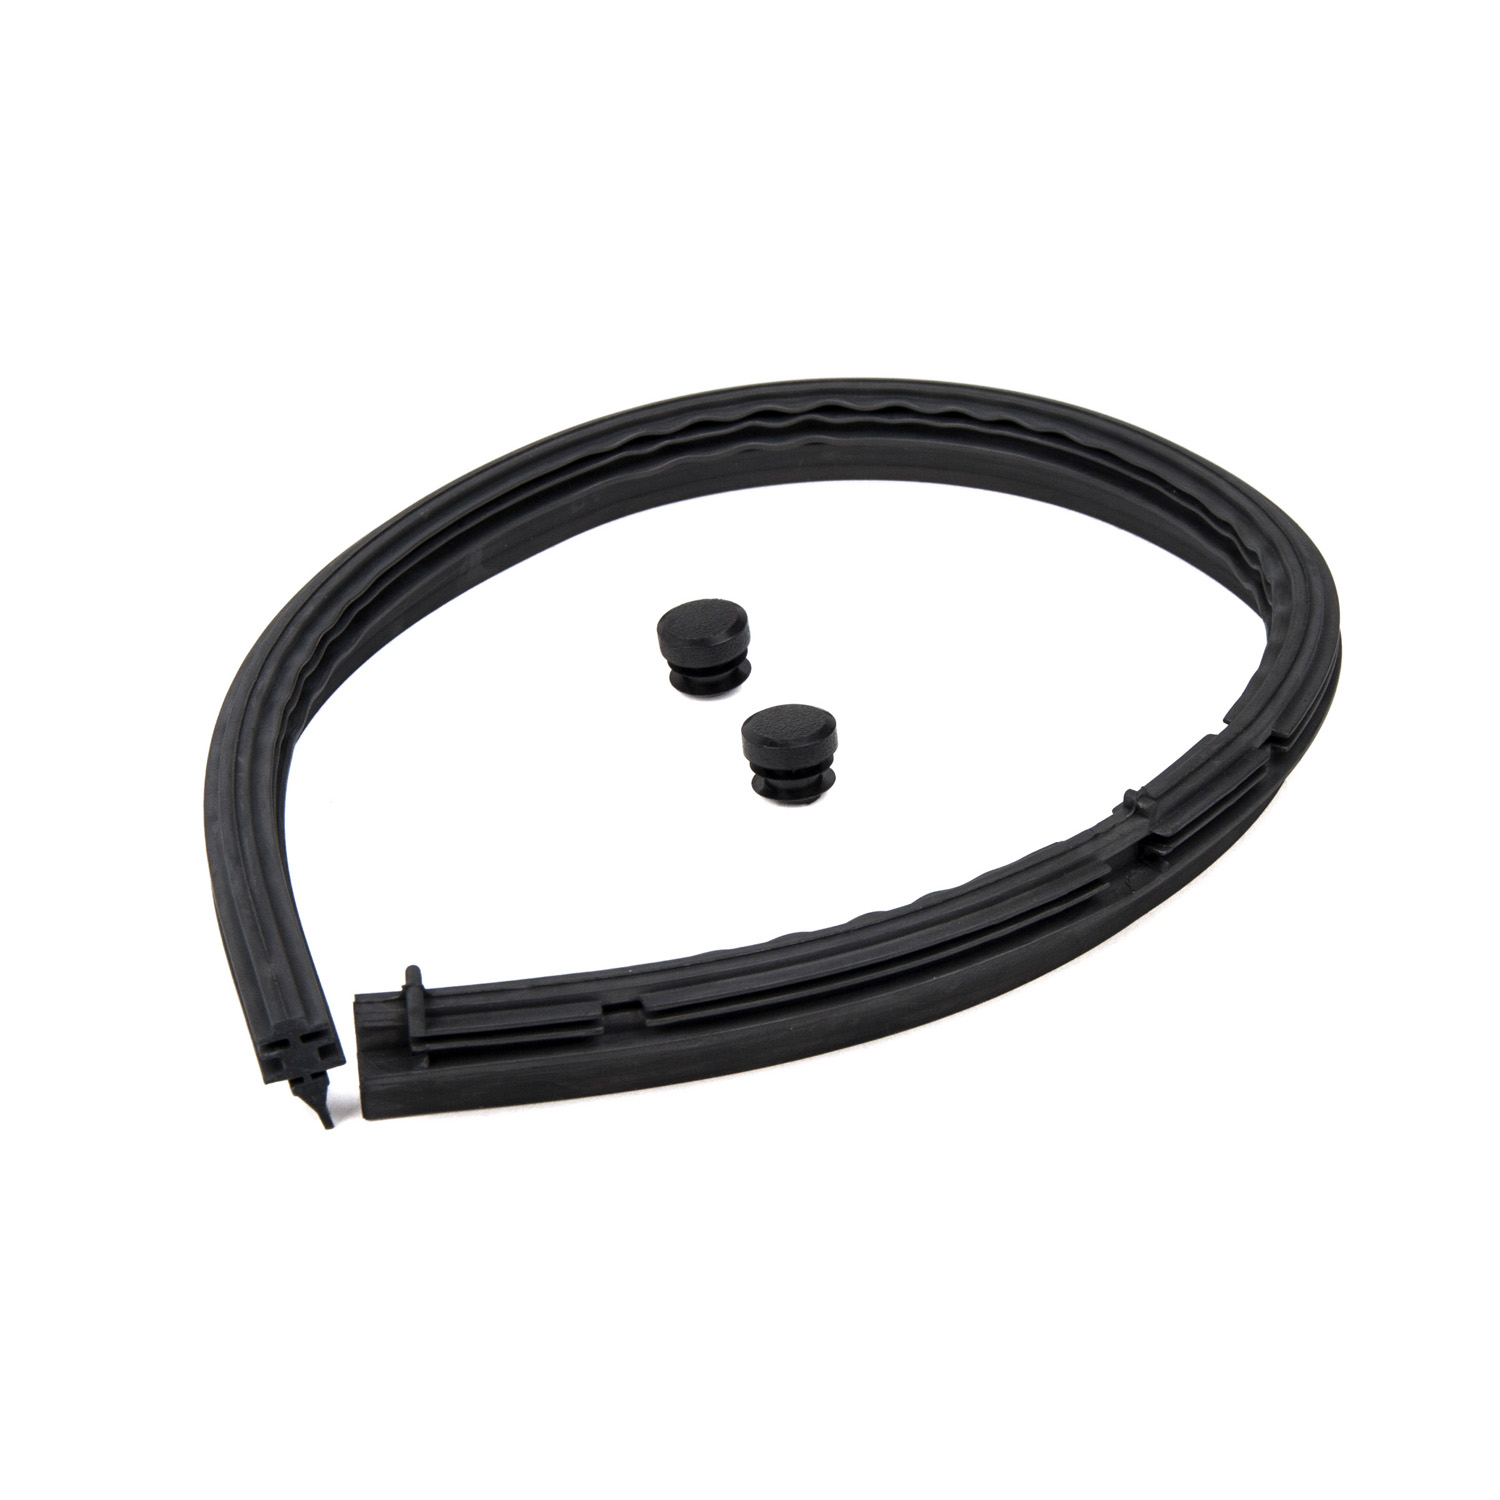 425-039-B Wiper rubber length 100 cm, with end caps